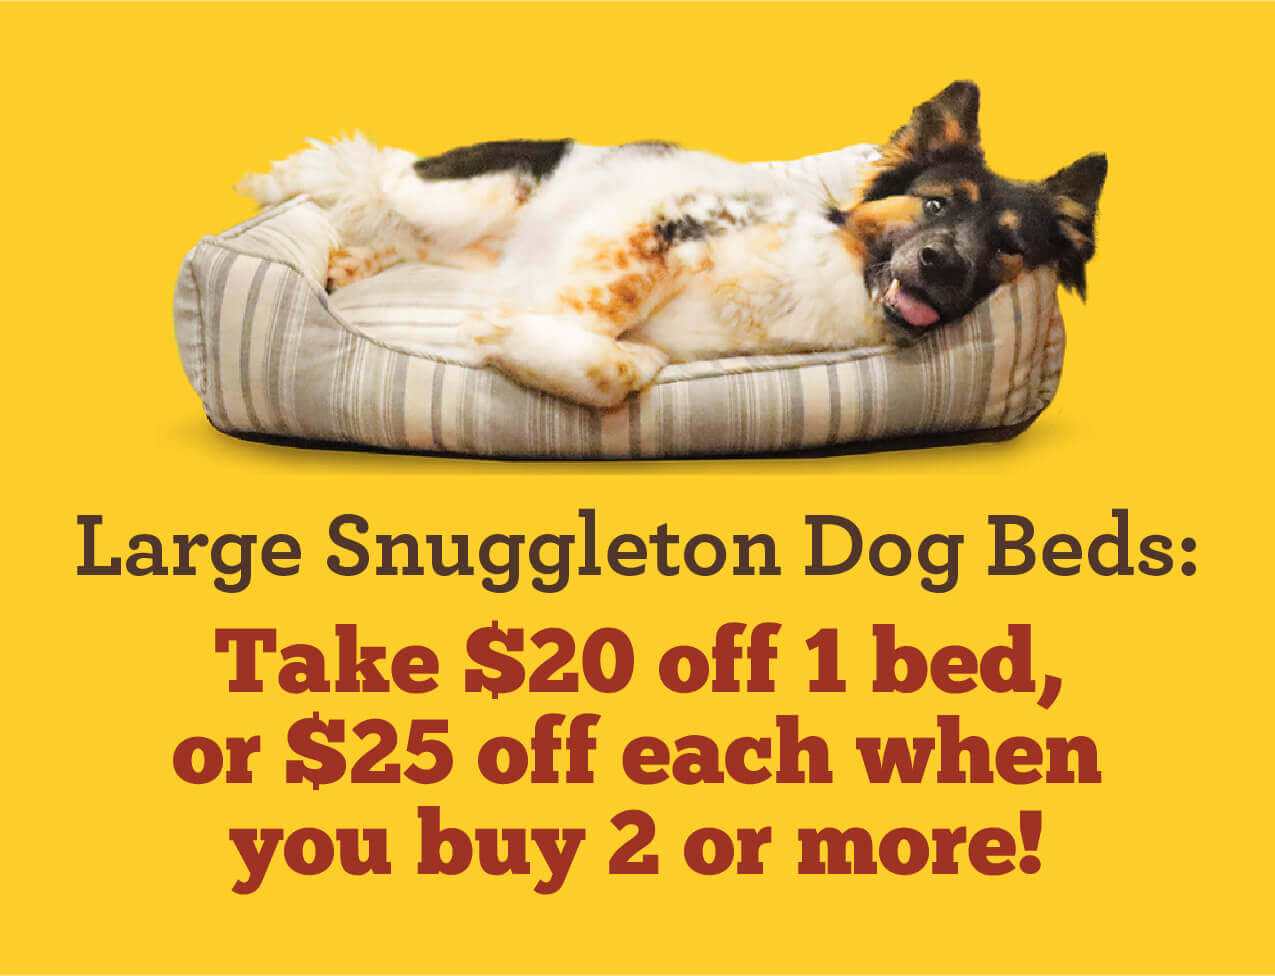 Large Snuggleton Dog Beds: Take $20 off 1 bed, or $25 off each when you buy 2 or more!